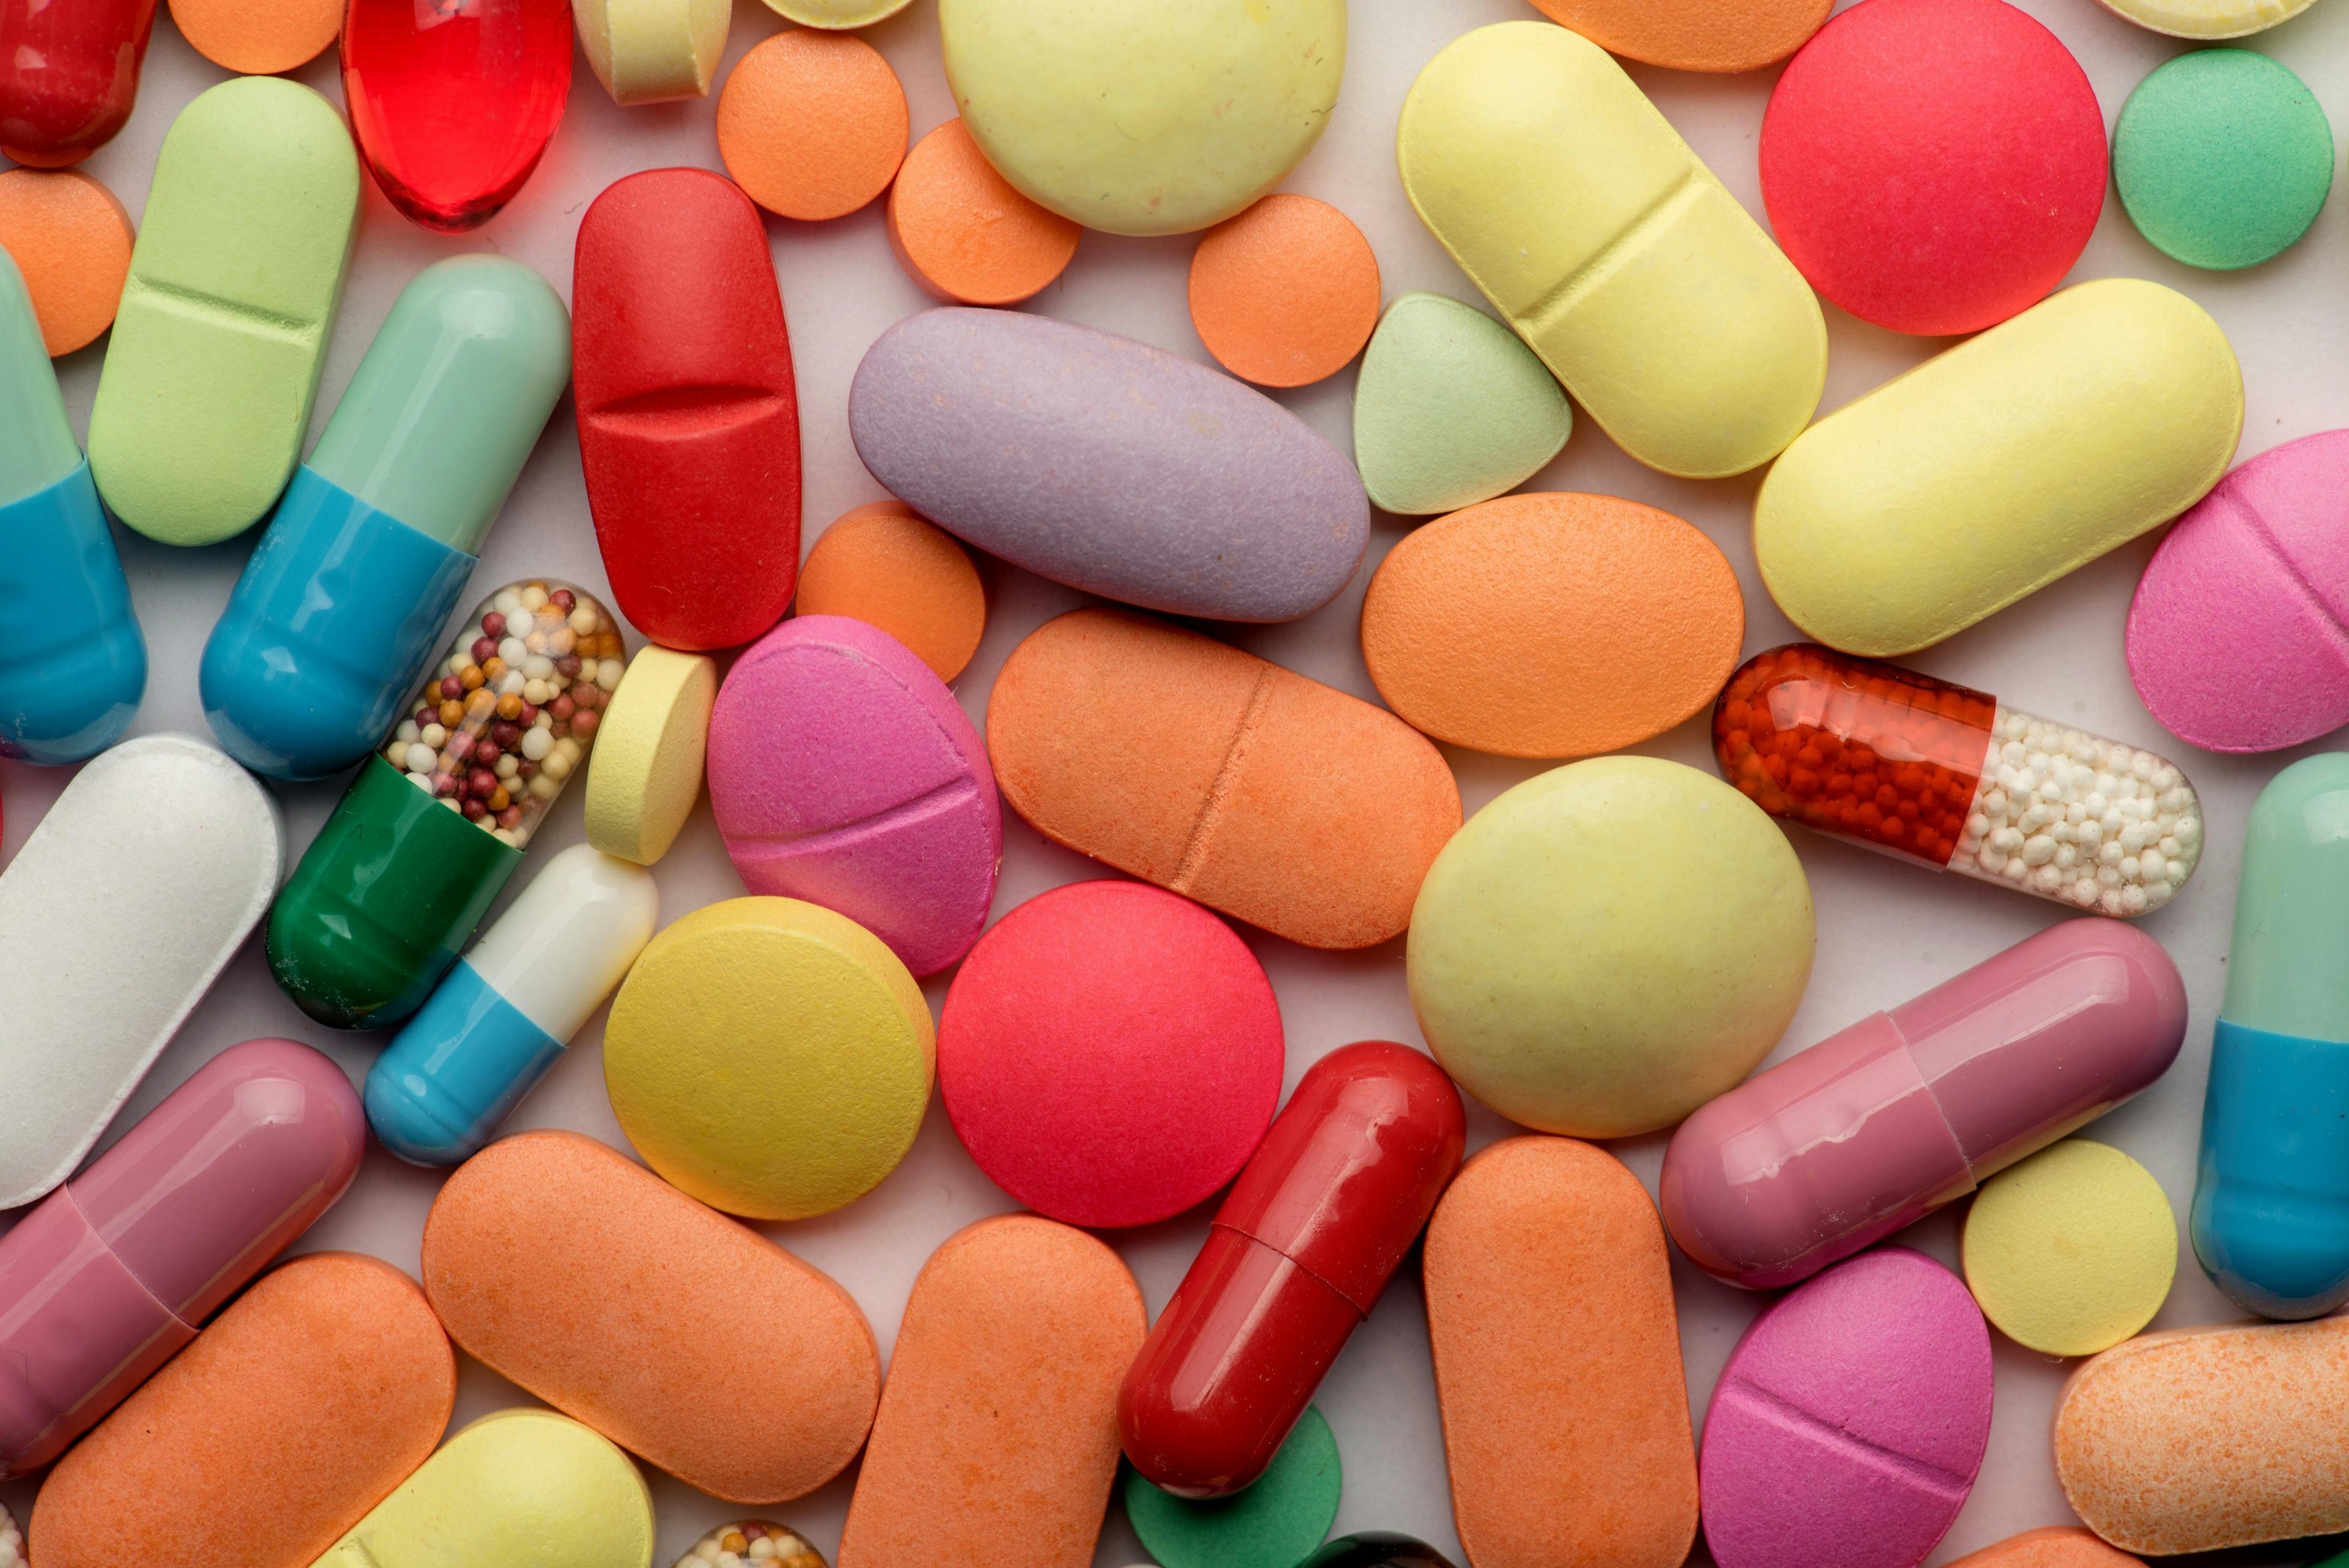 Multicolored tablets on white background. Image Credit: Adobe Stock Images/grthirteen